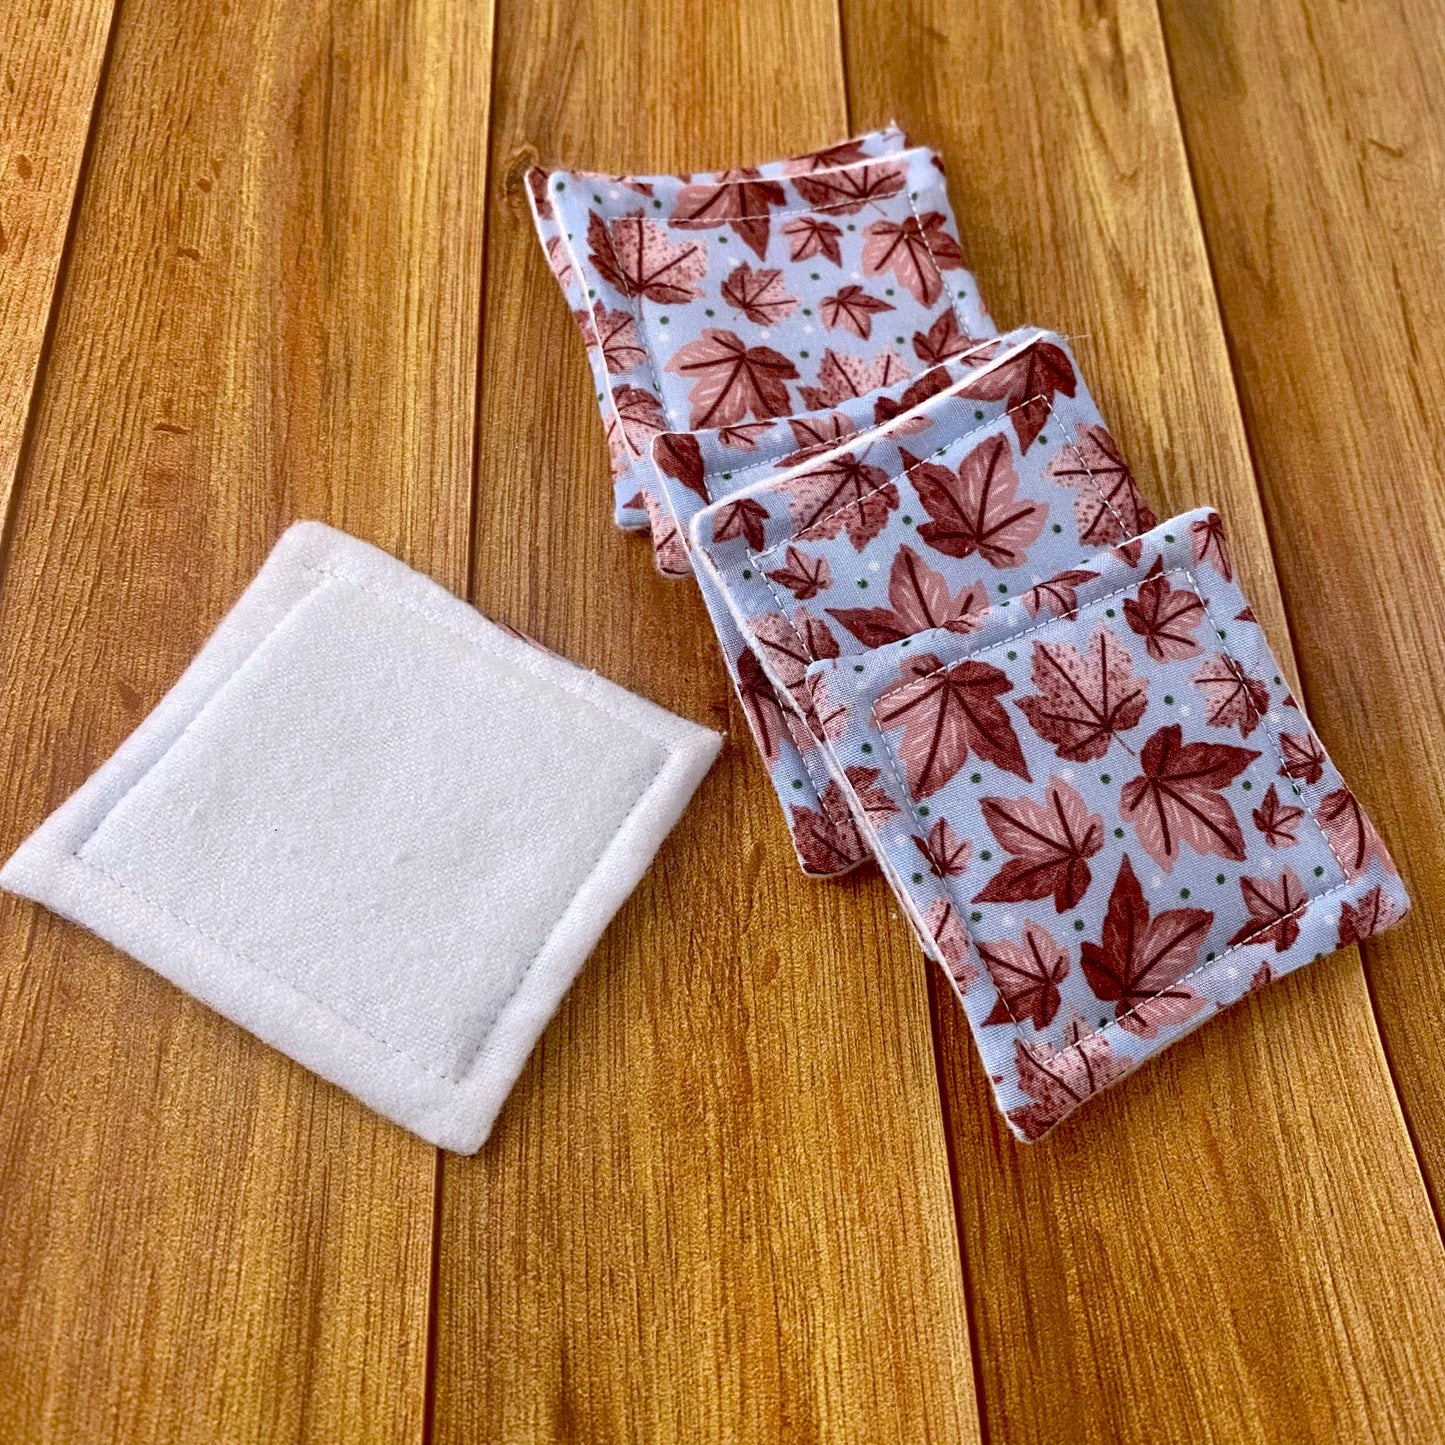 reusable skincare pads in pink leafy pattern on wood backdrop